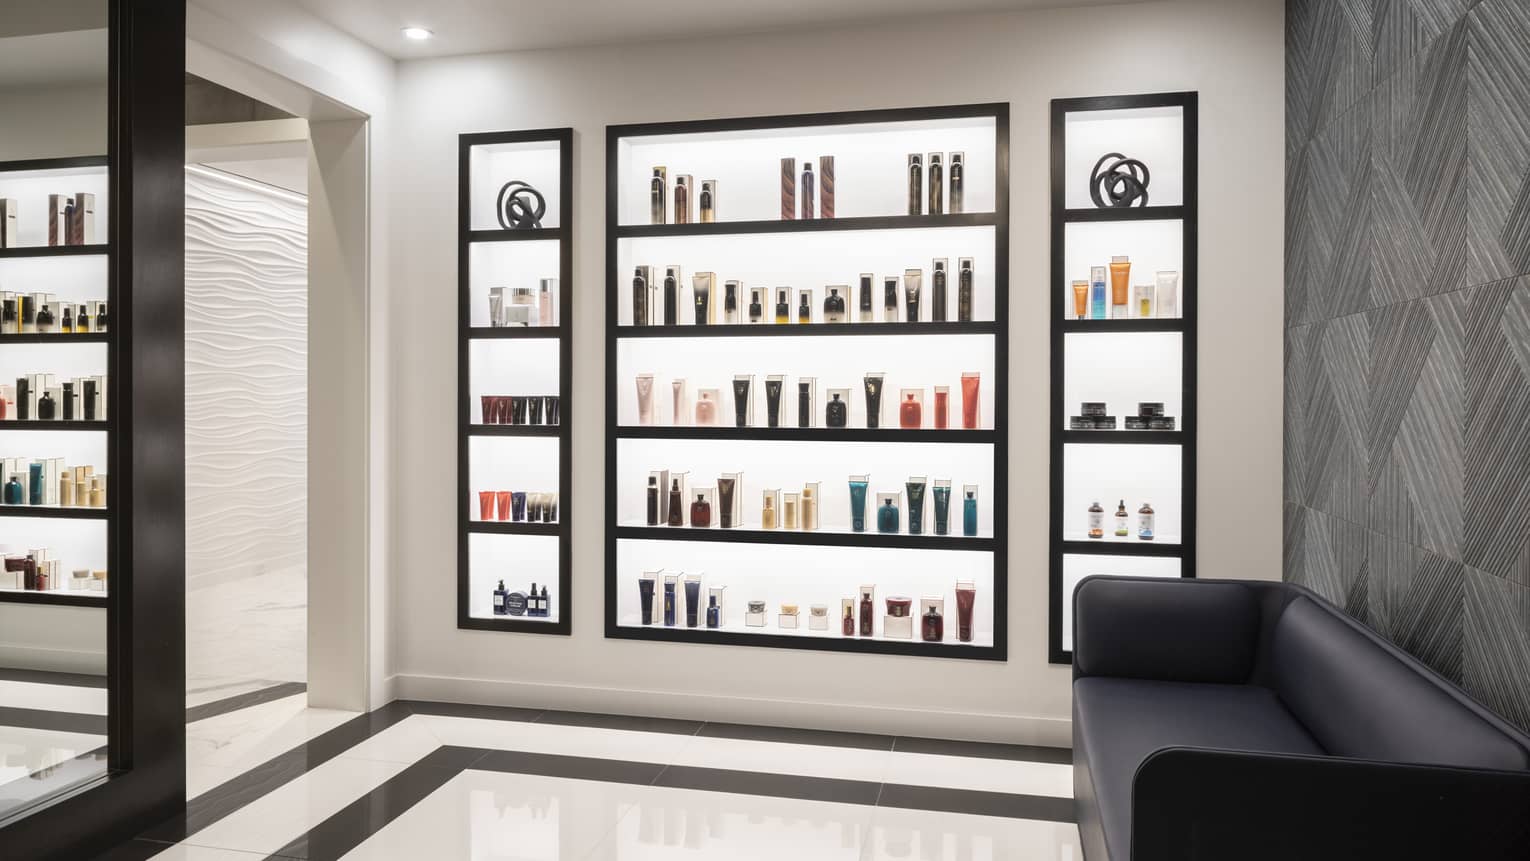 A wall of spa and skin care items for purchase.